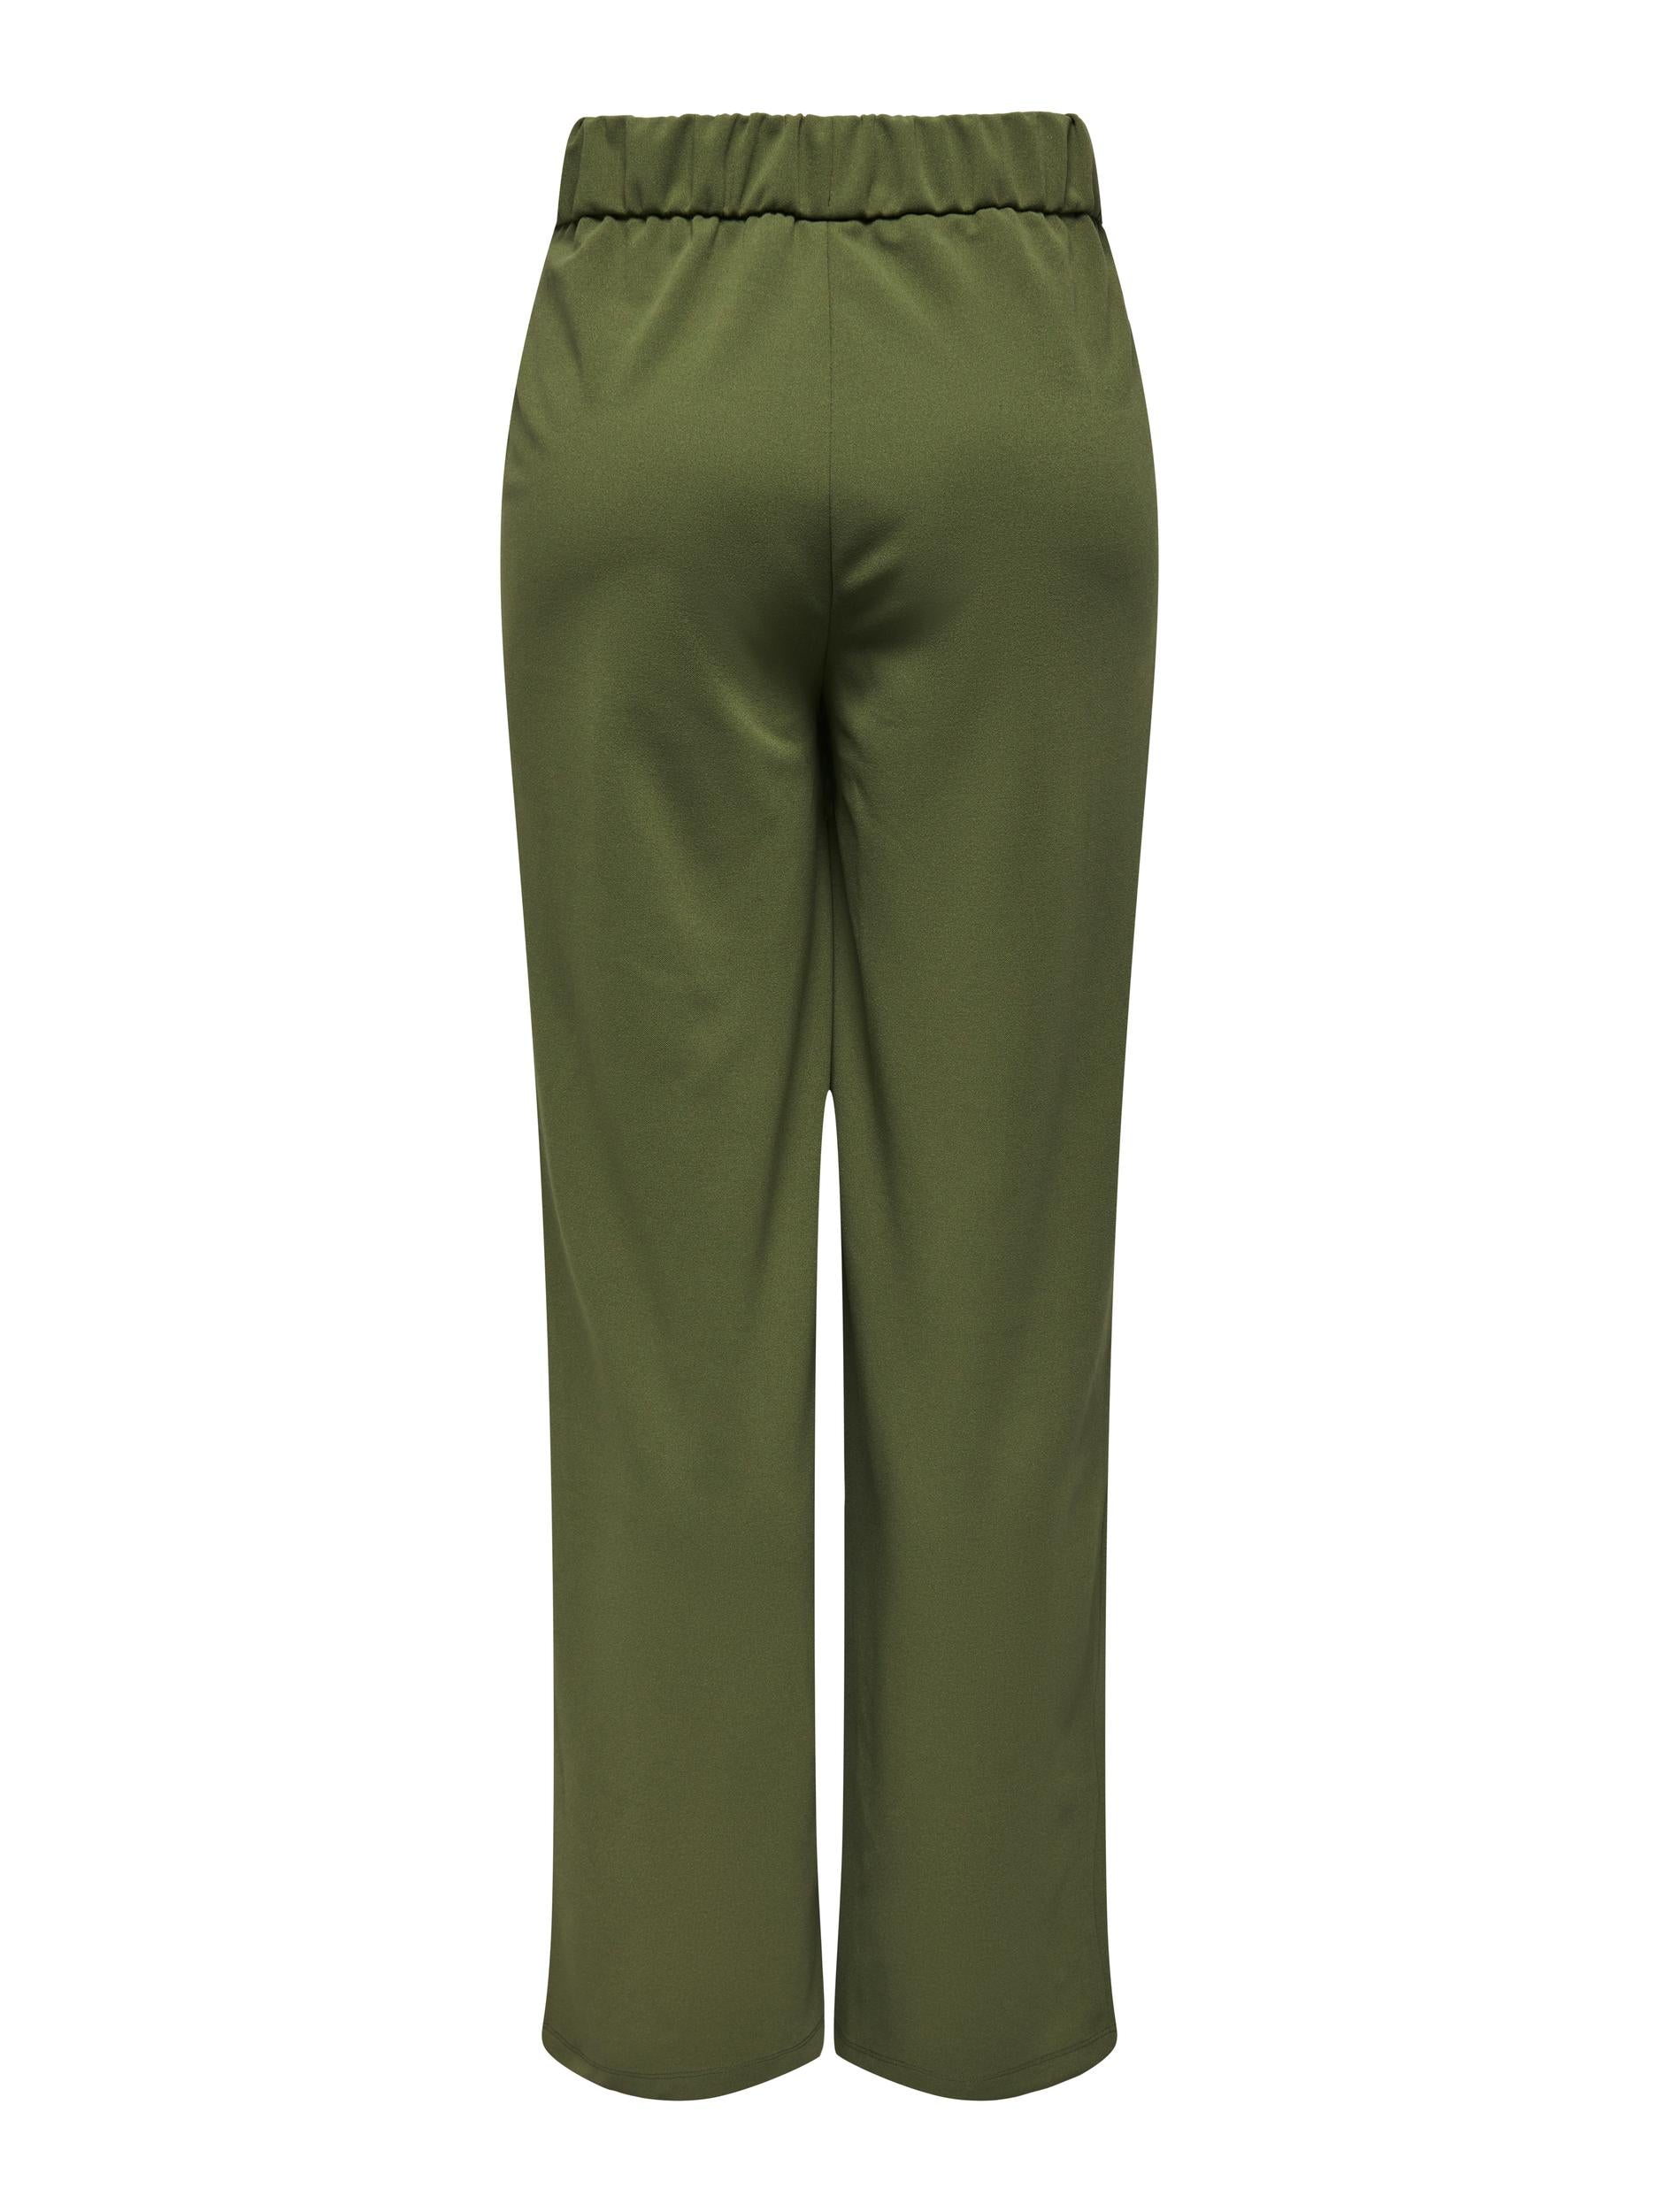 Sania Button Winter Moss Pant-Back view